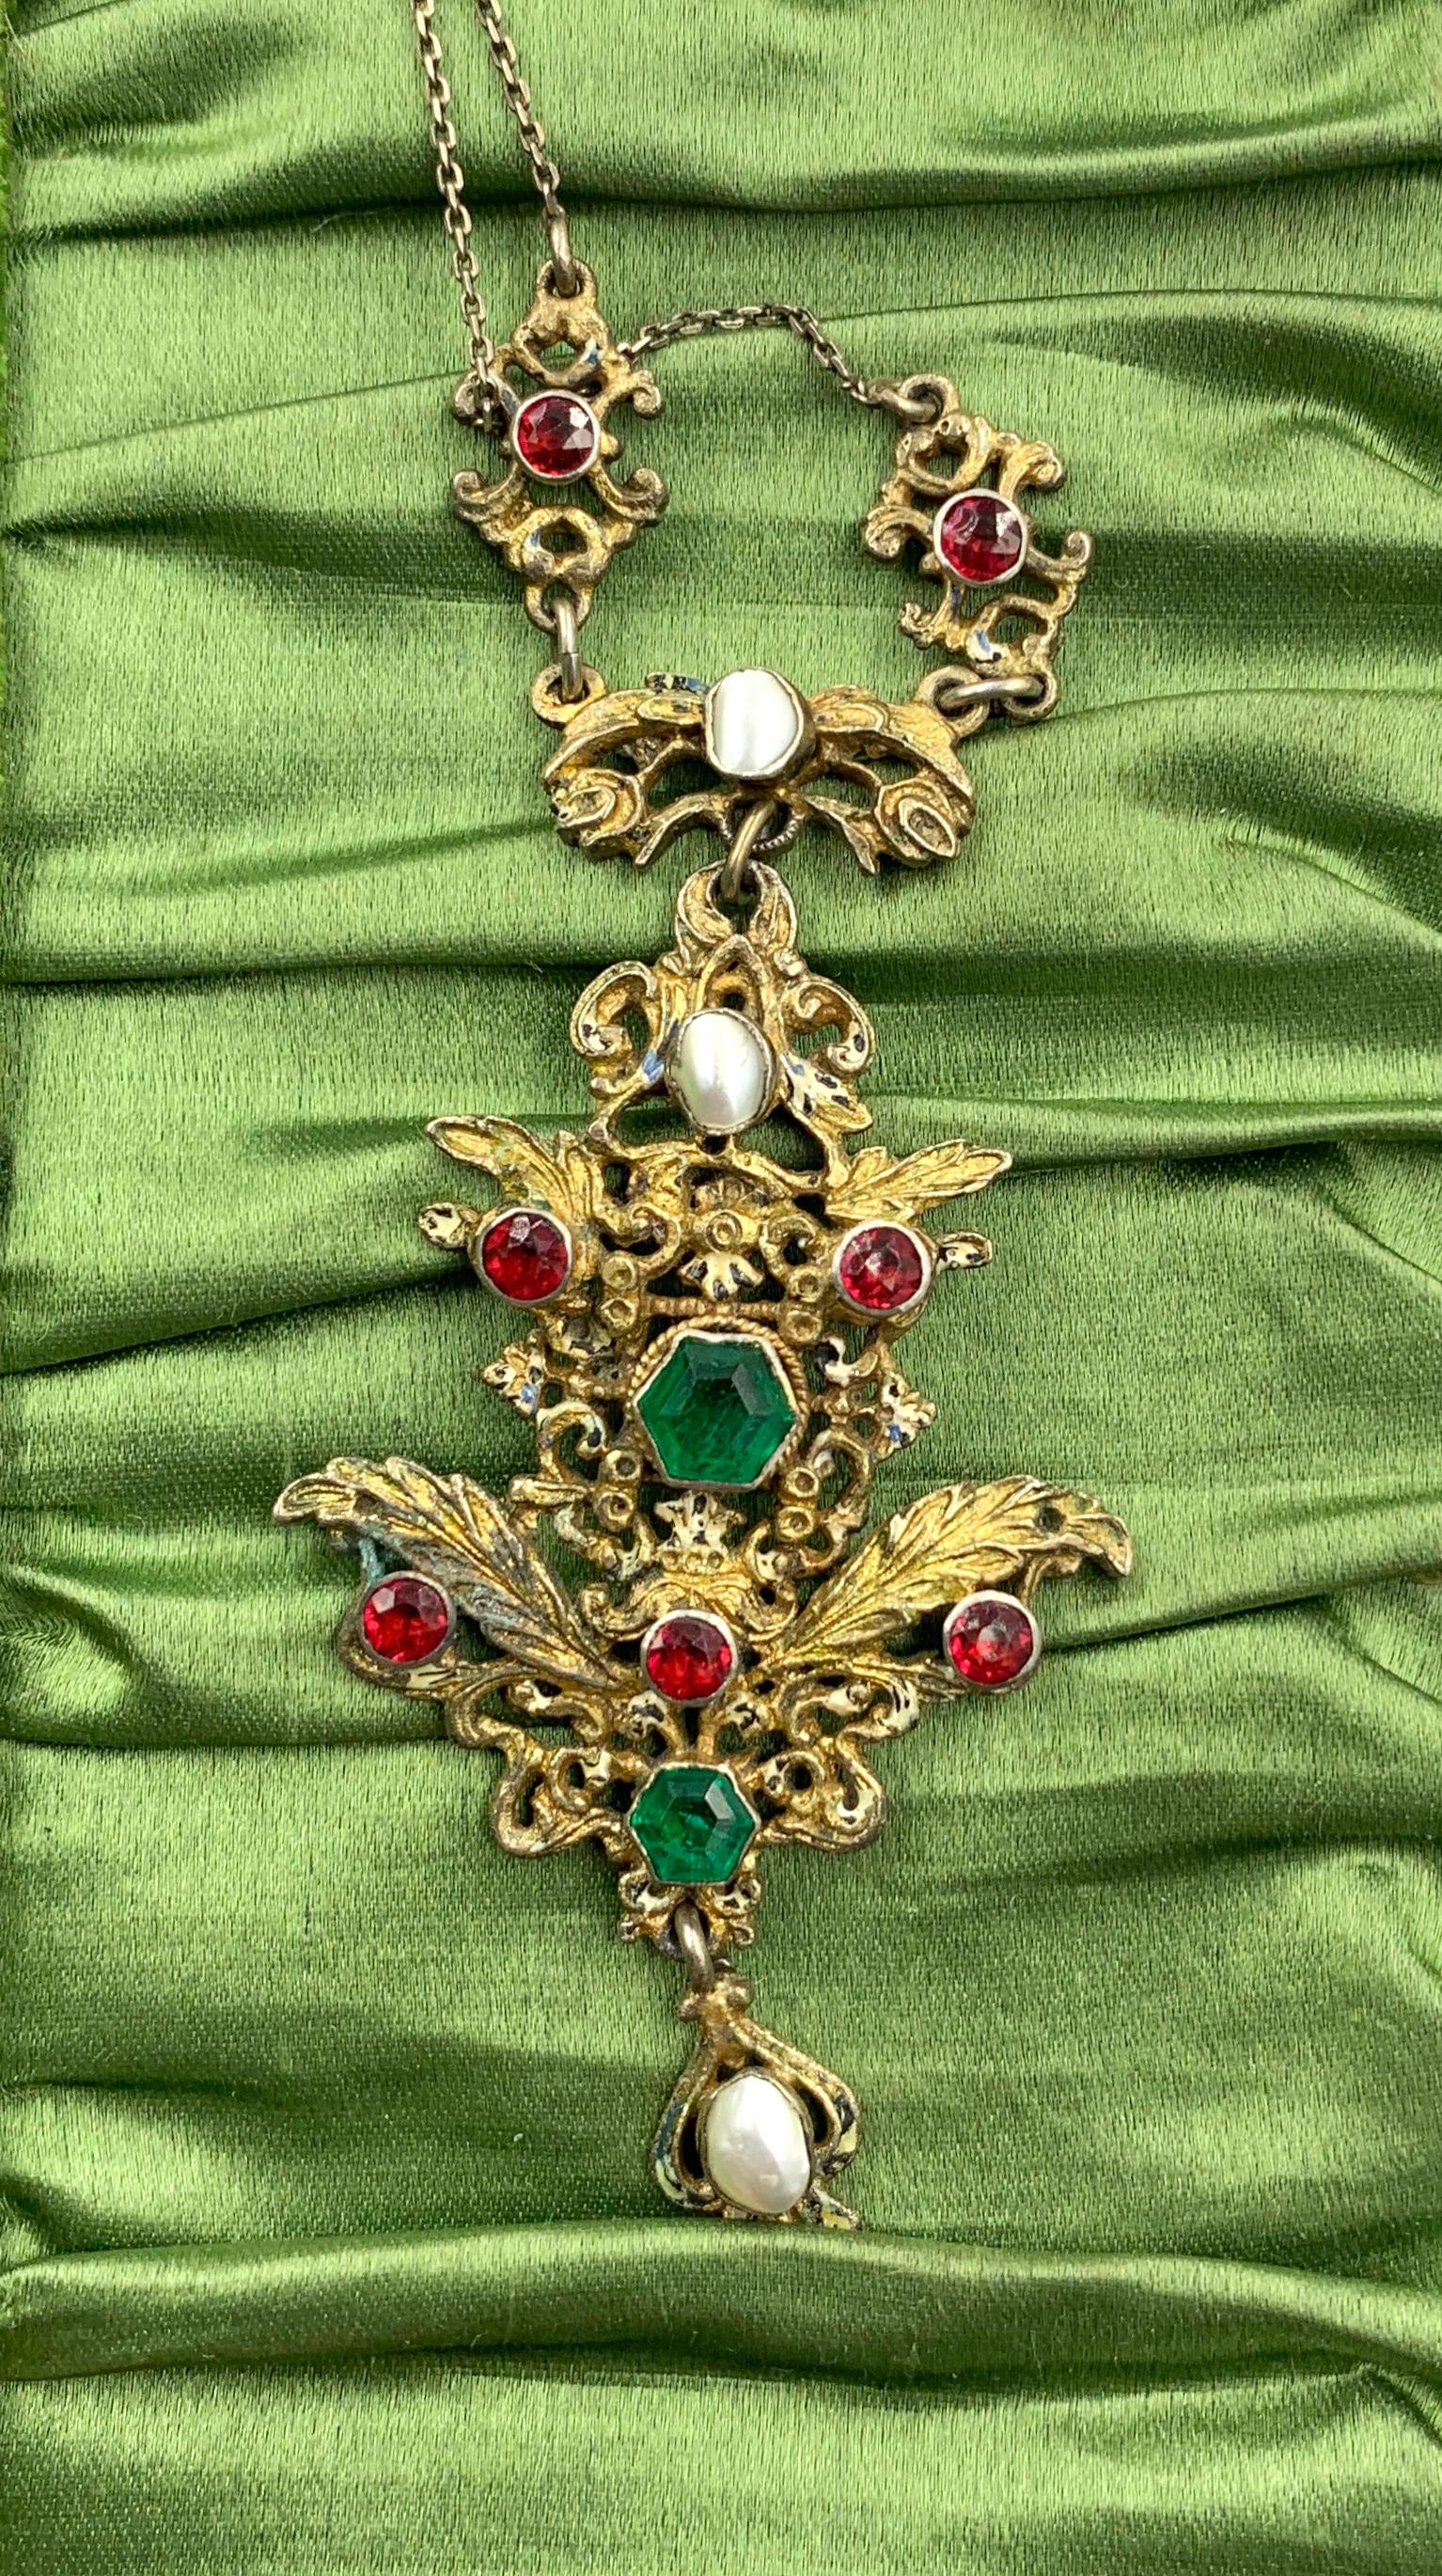 Antique Emerald Ruby Pearl Pendant Necklace Austro-Hungarian Renaissance Revival In Good Condition For Sale In New York, NY